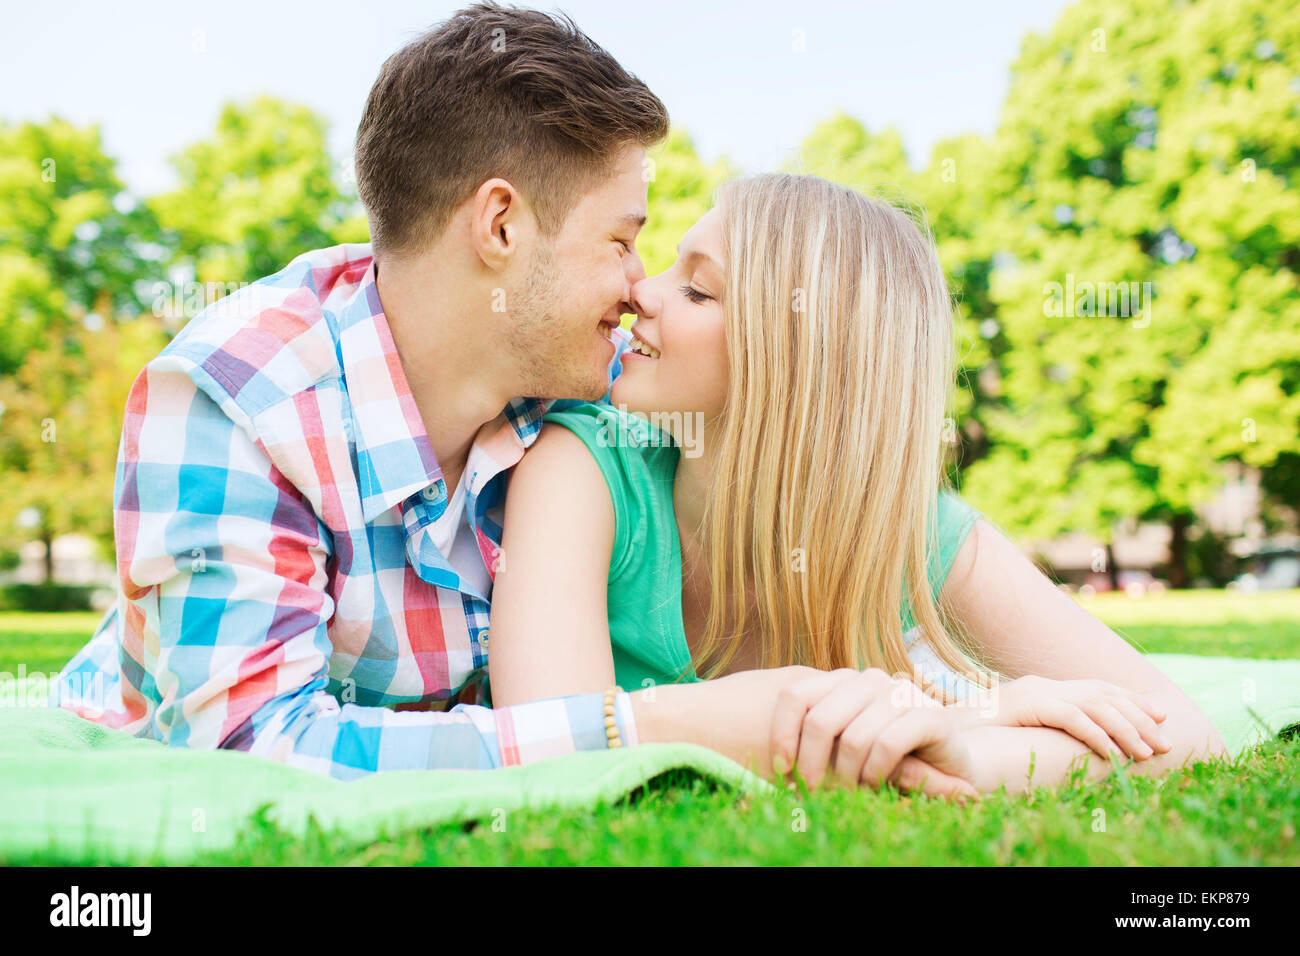 Smiling couple in park Banque D'Images